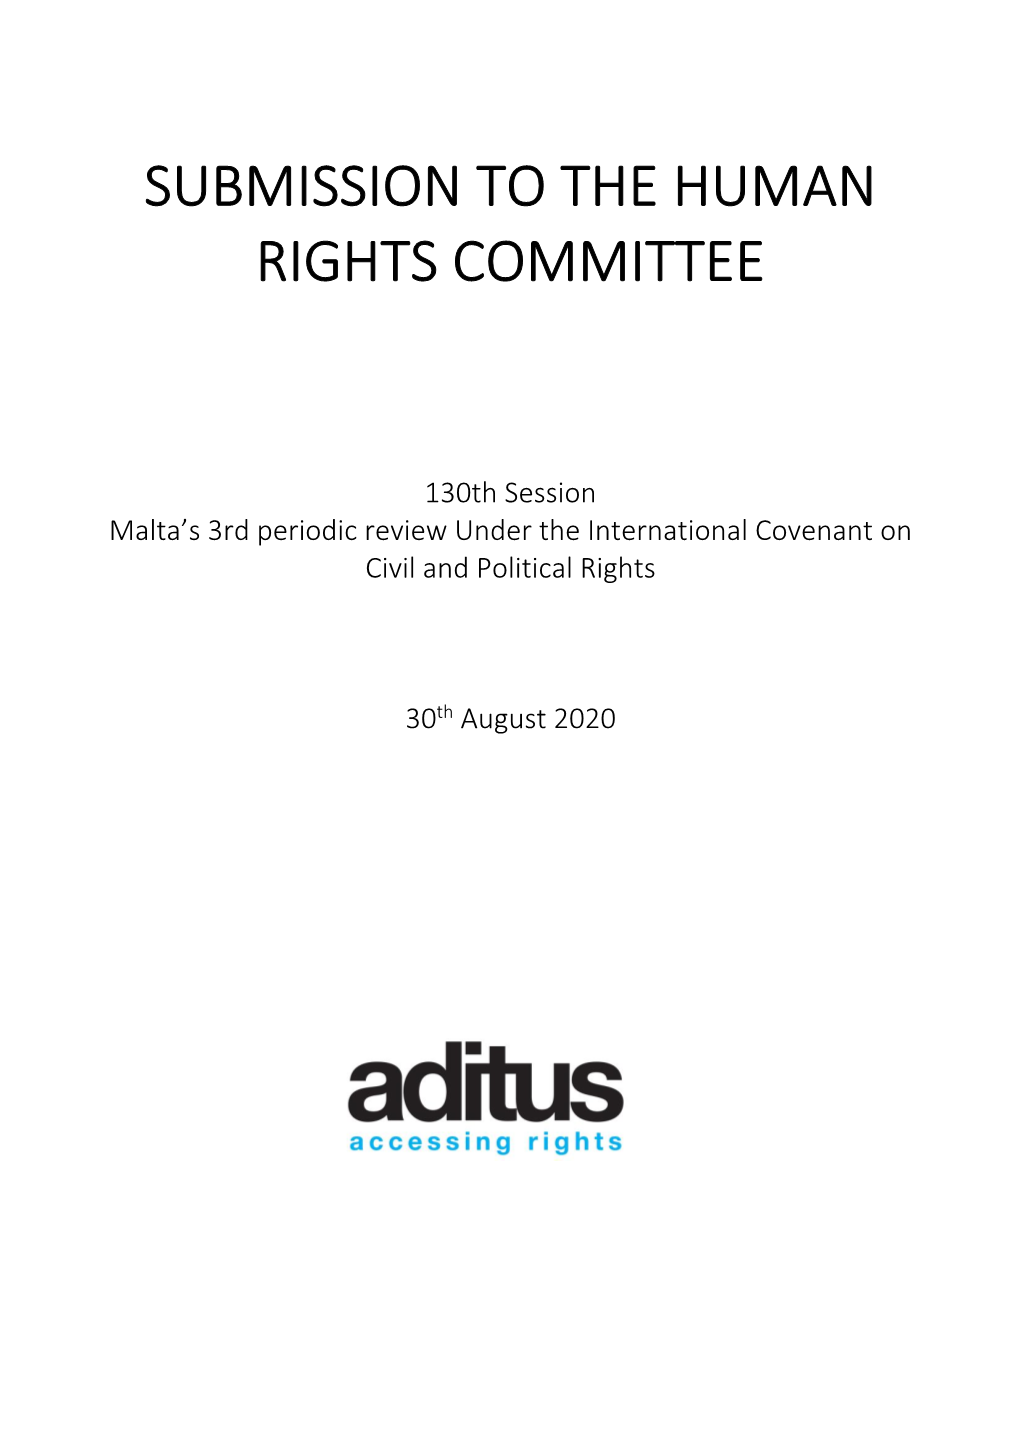 Submissions to the Human Rights Committee for Malta's 3Rd Periodic Review Under the International Covenant On